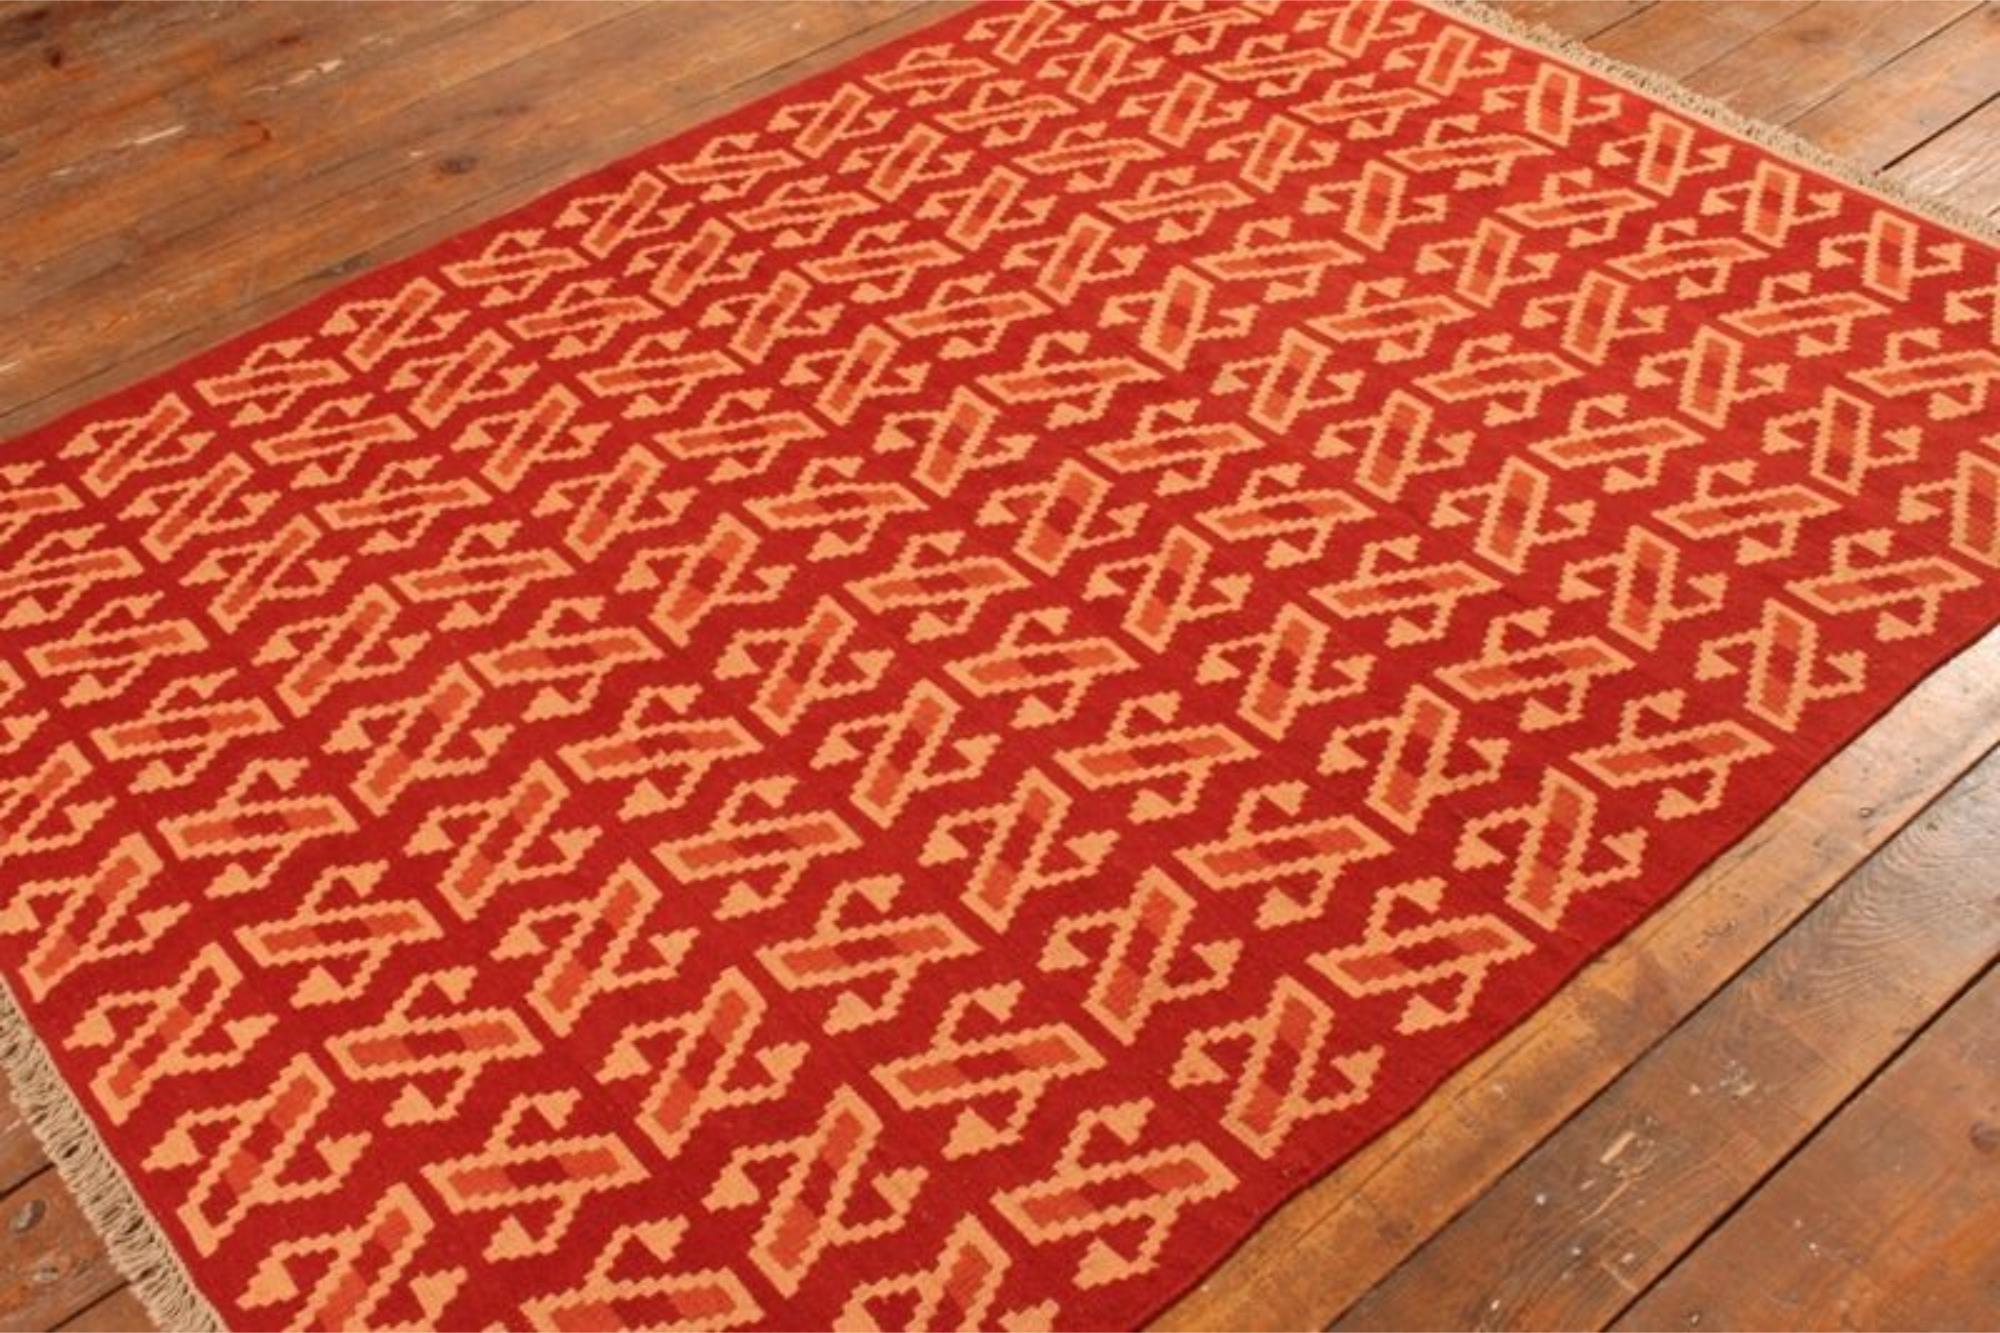 Handmade Vintage Persian Style Ardabil Kilim Rug 5.2' x 6.8', 1970s - 1T36 For Sale 5